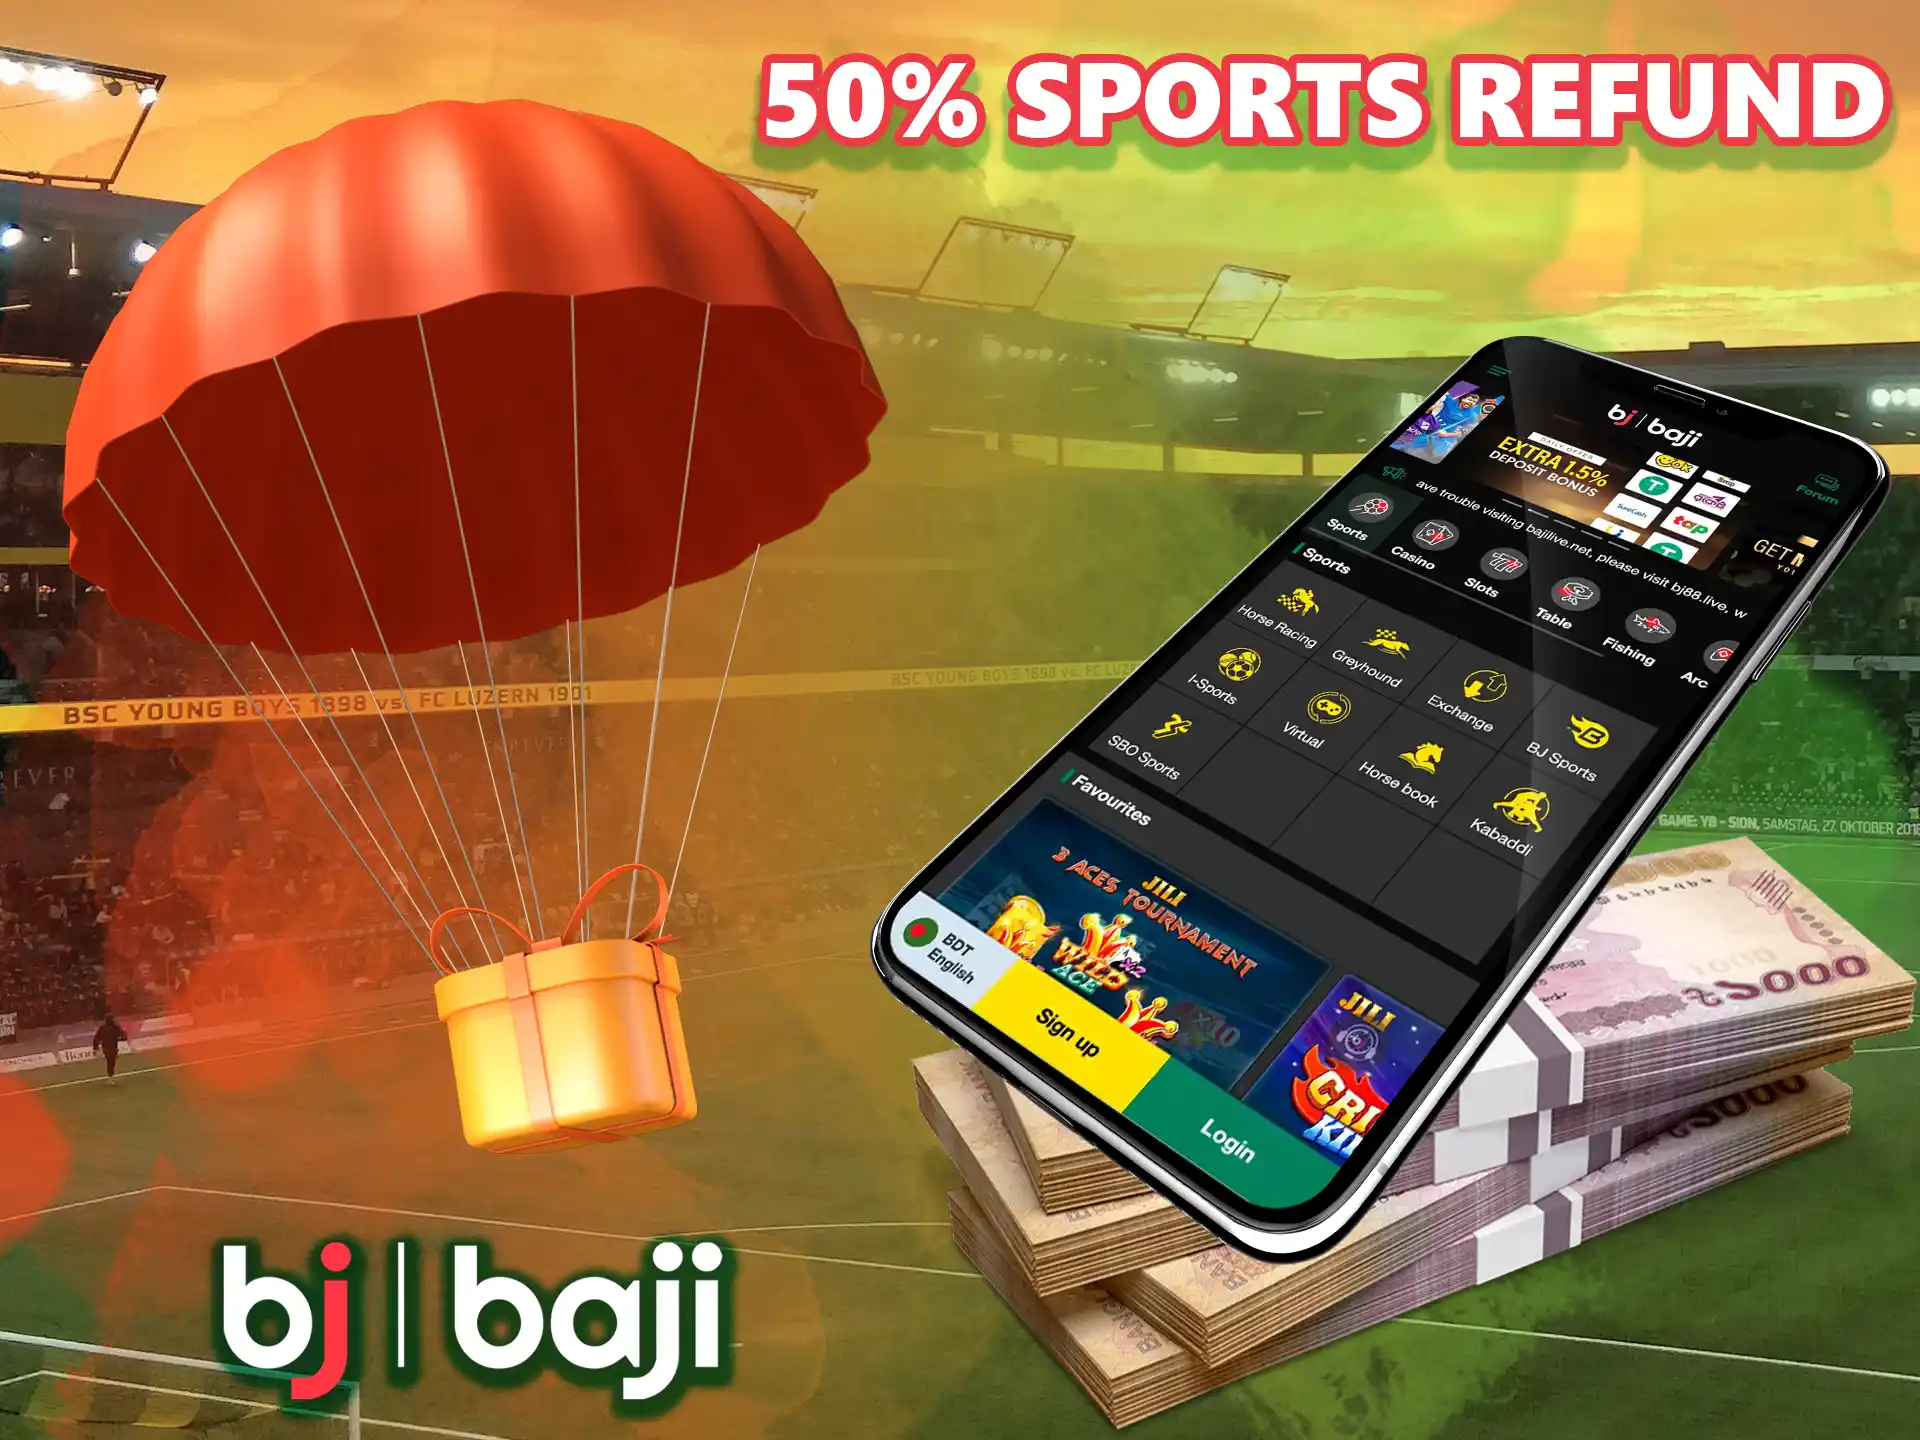 In case you lose, you will not lose any cash, you can get a special bonus within 24 hours at Baji.